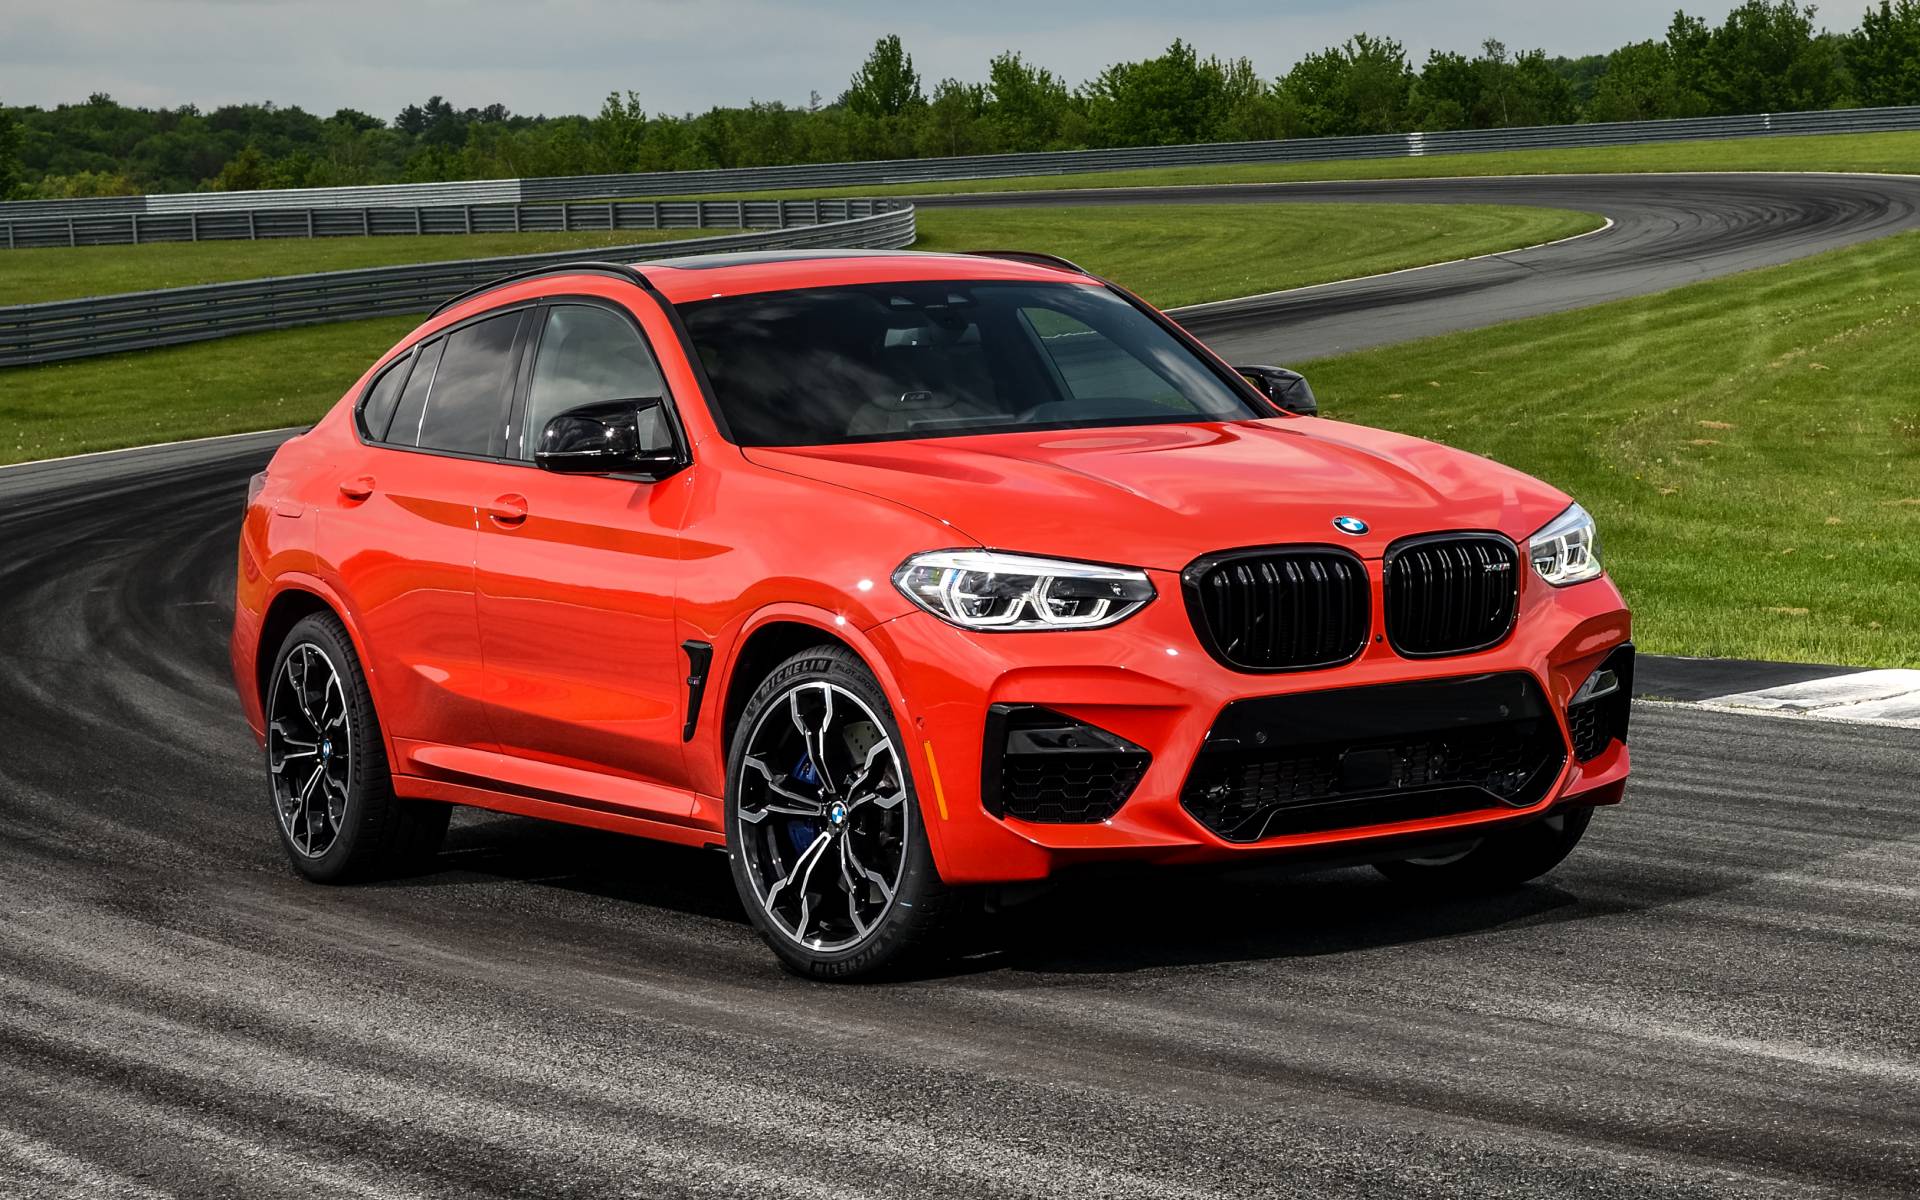 2020 BMW X4 - News, reviews, picture galleries and videos - The Car Guide